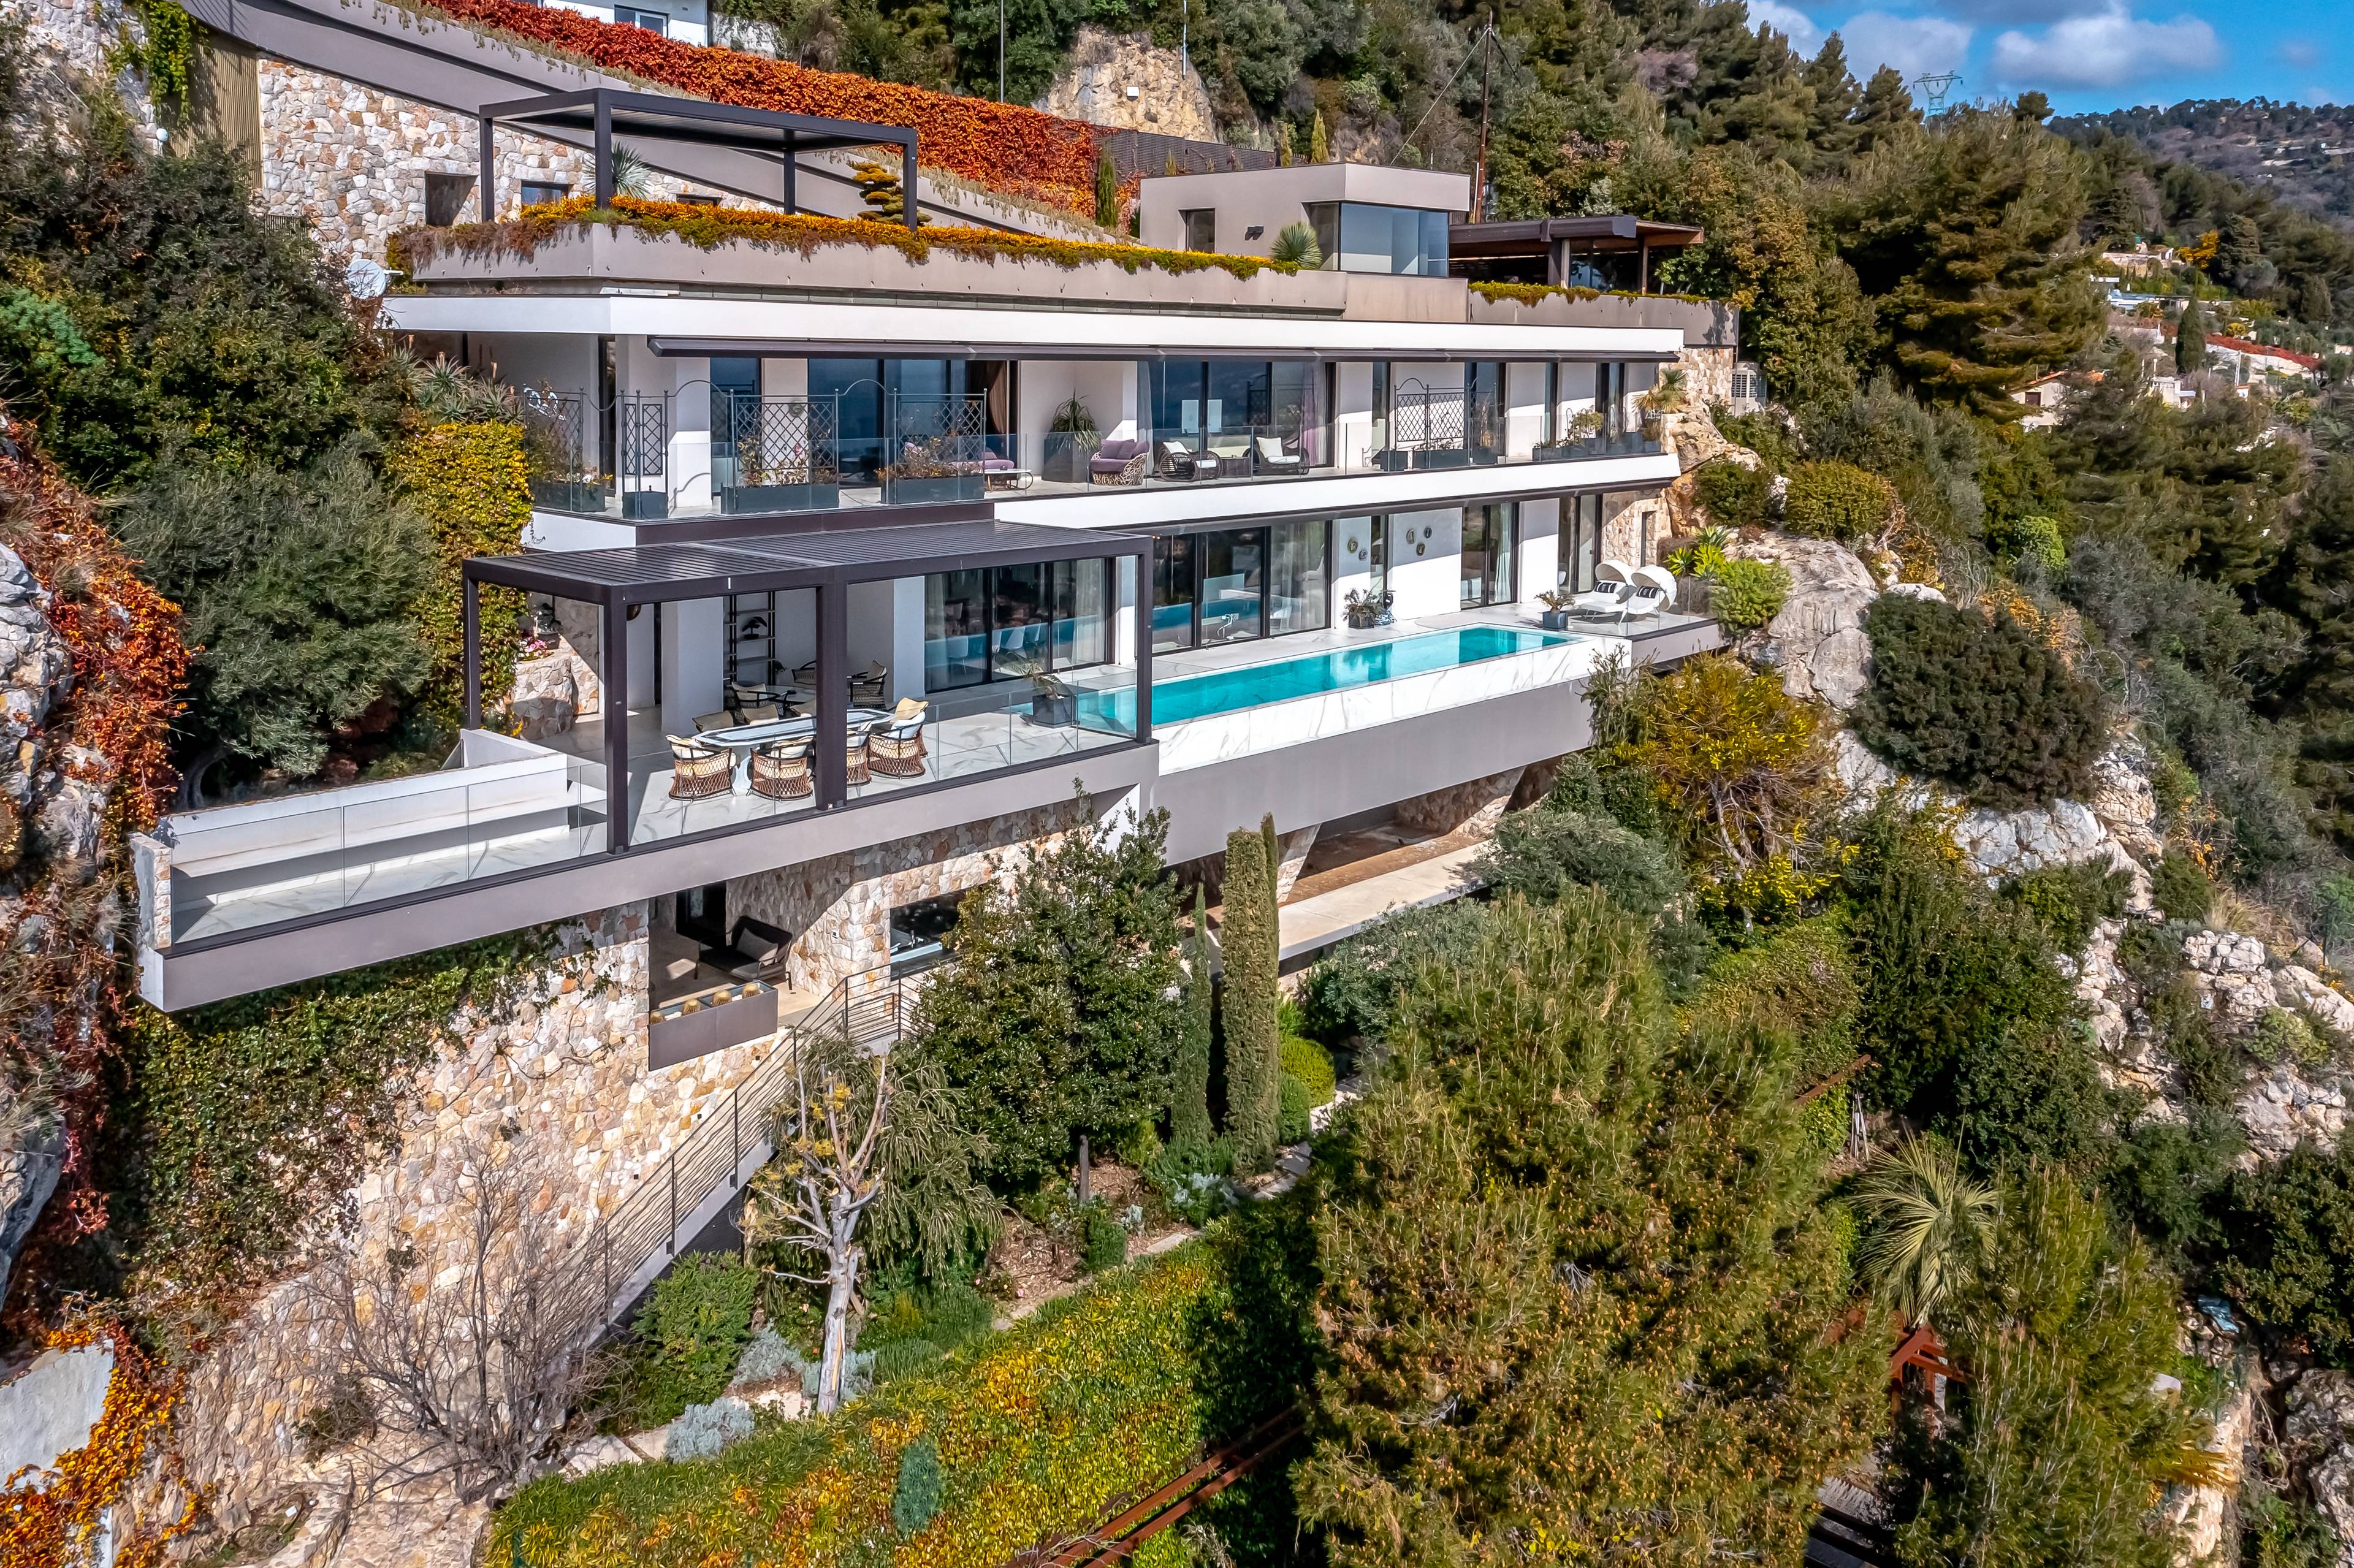 Contemporary living on the French Riviera with panoramic sea views just outside Monaco that is conveniently served by a helipad.